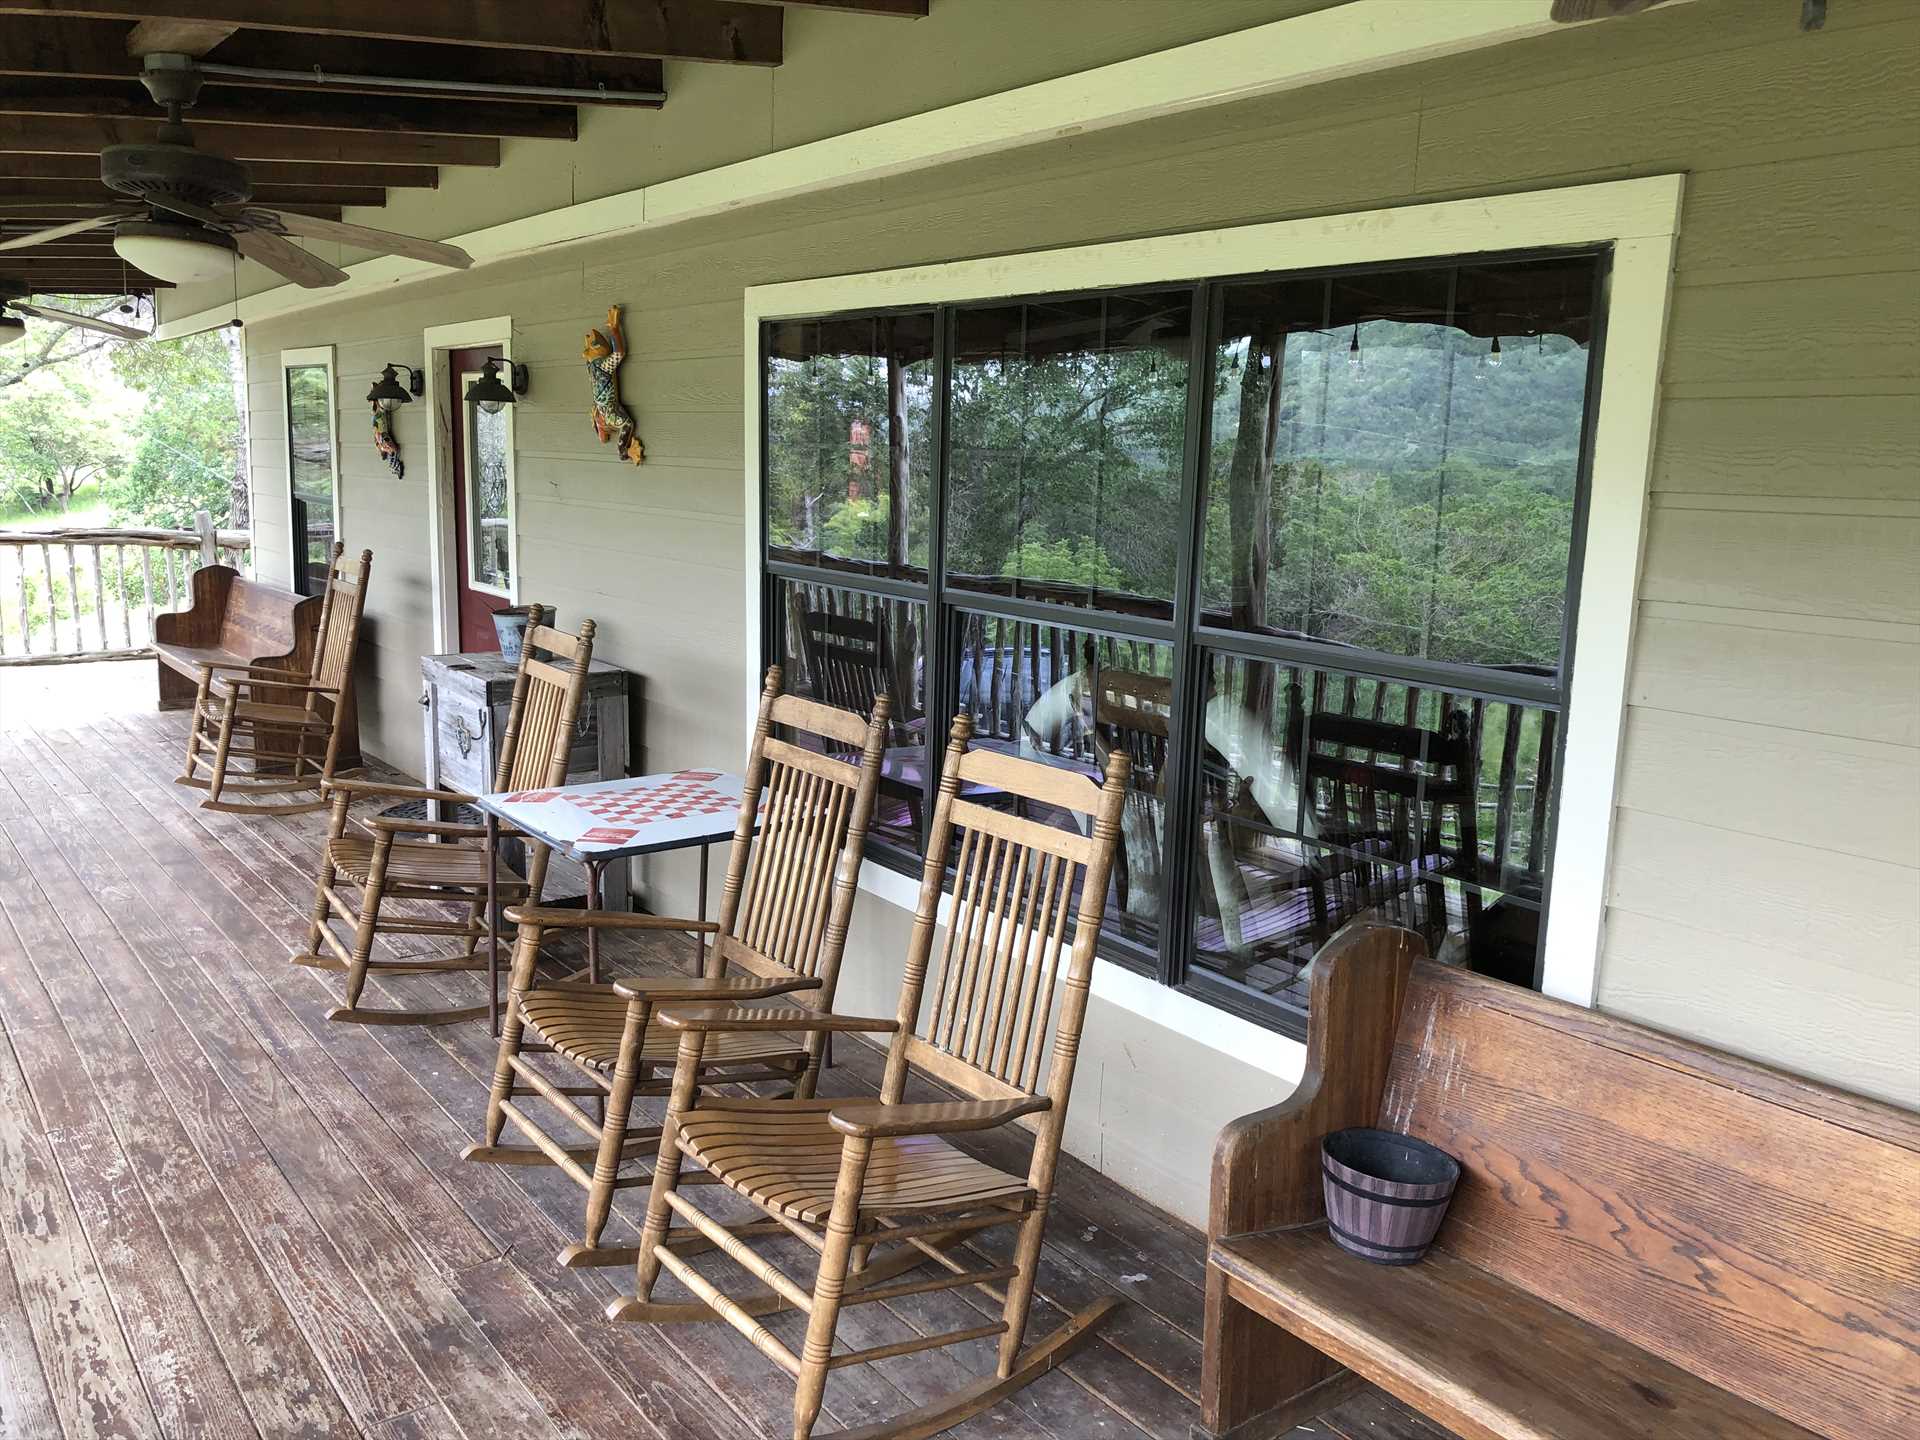                                                 A glass of wine, a rocking chair, and sweet mountain breezes all await you on the shaded country porch!